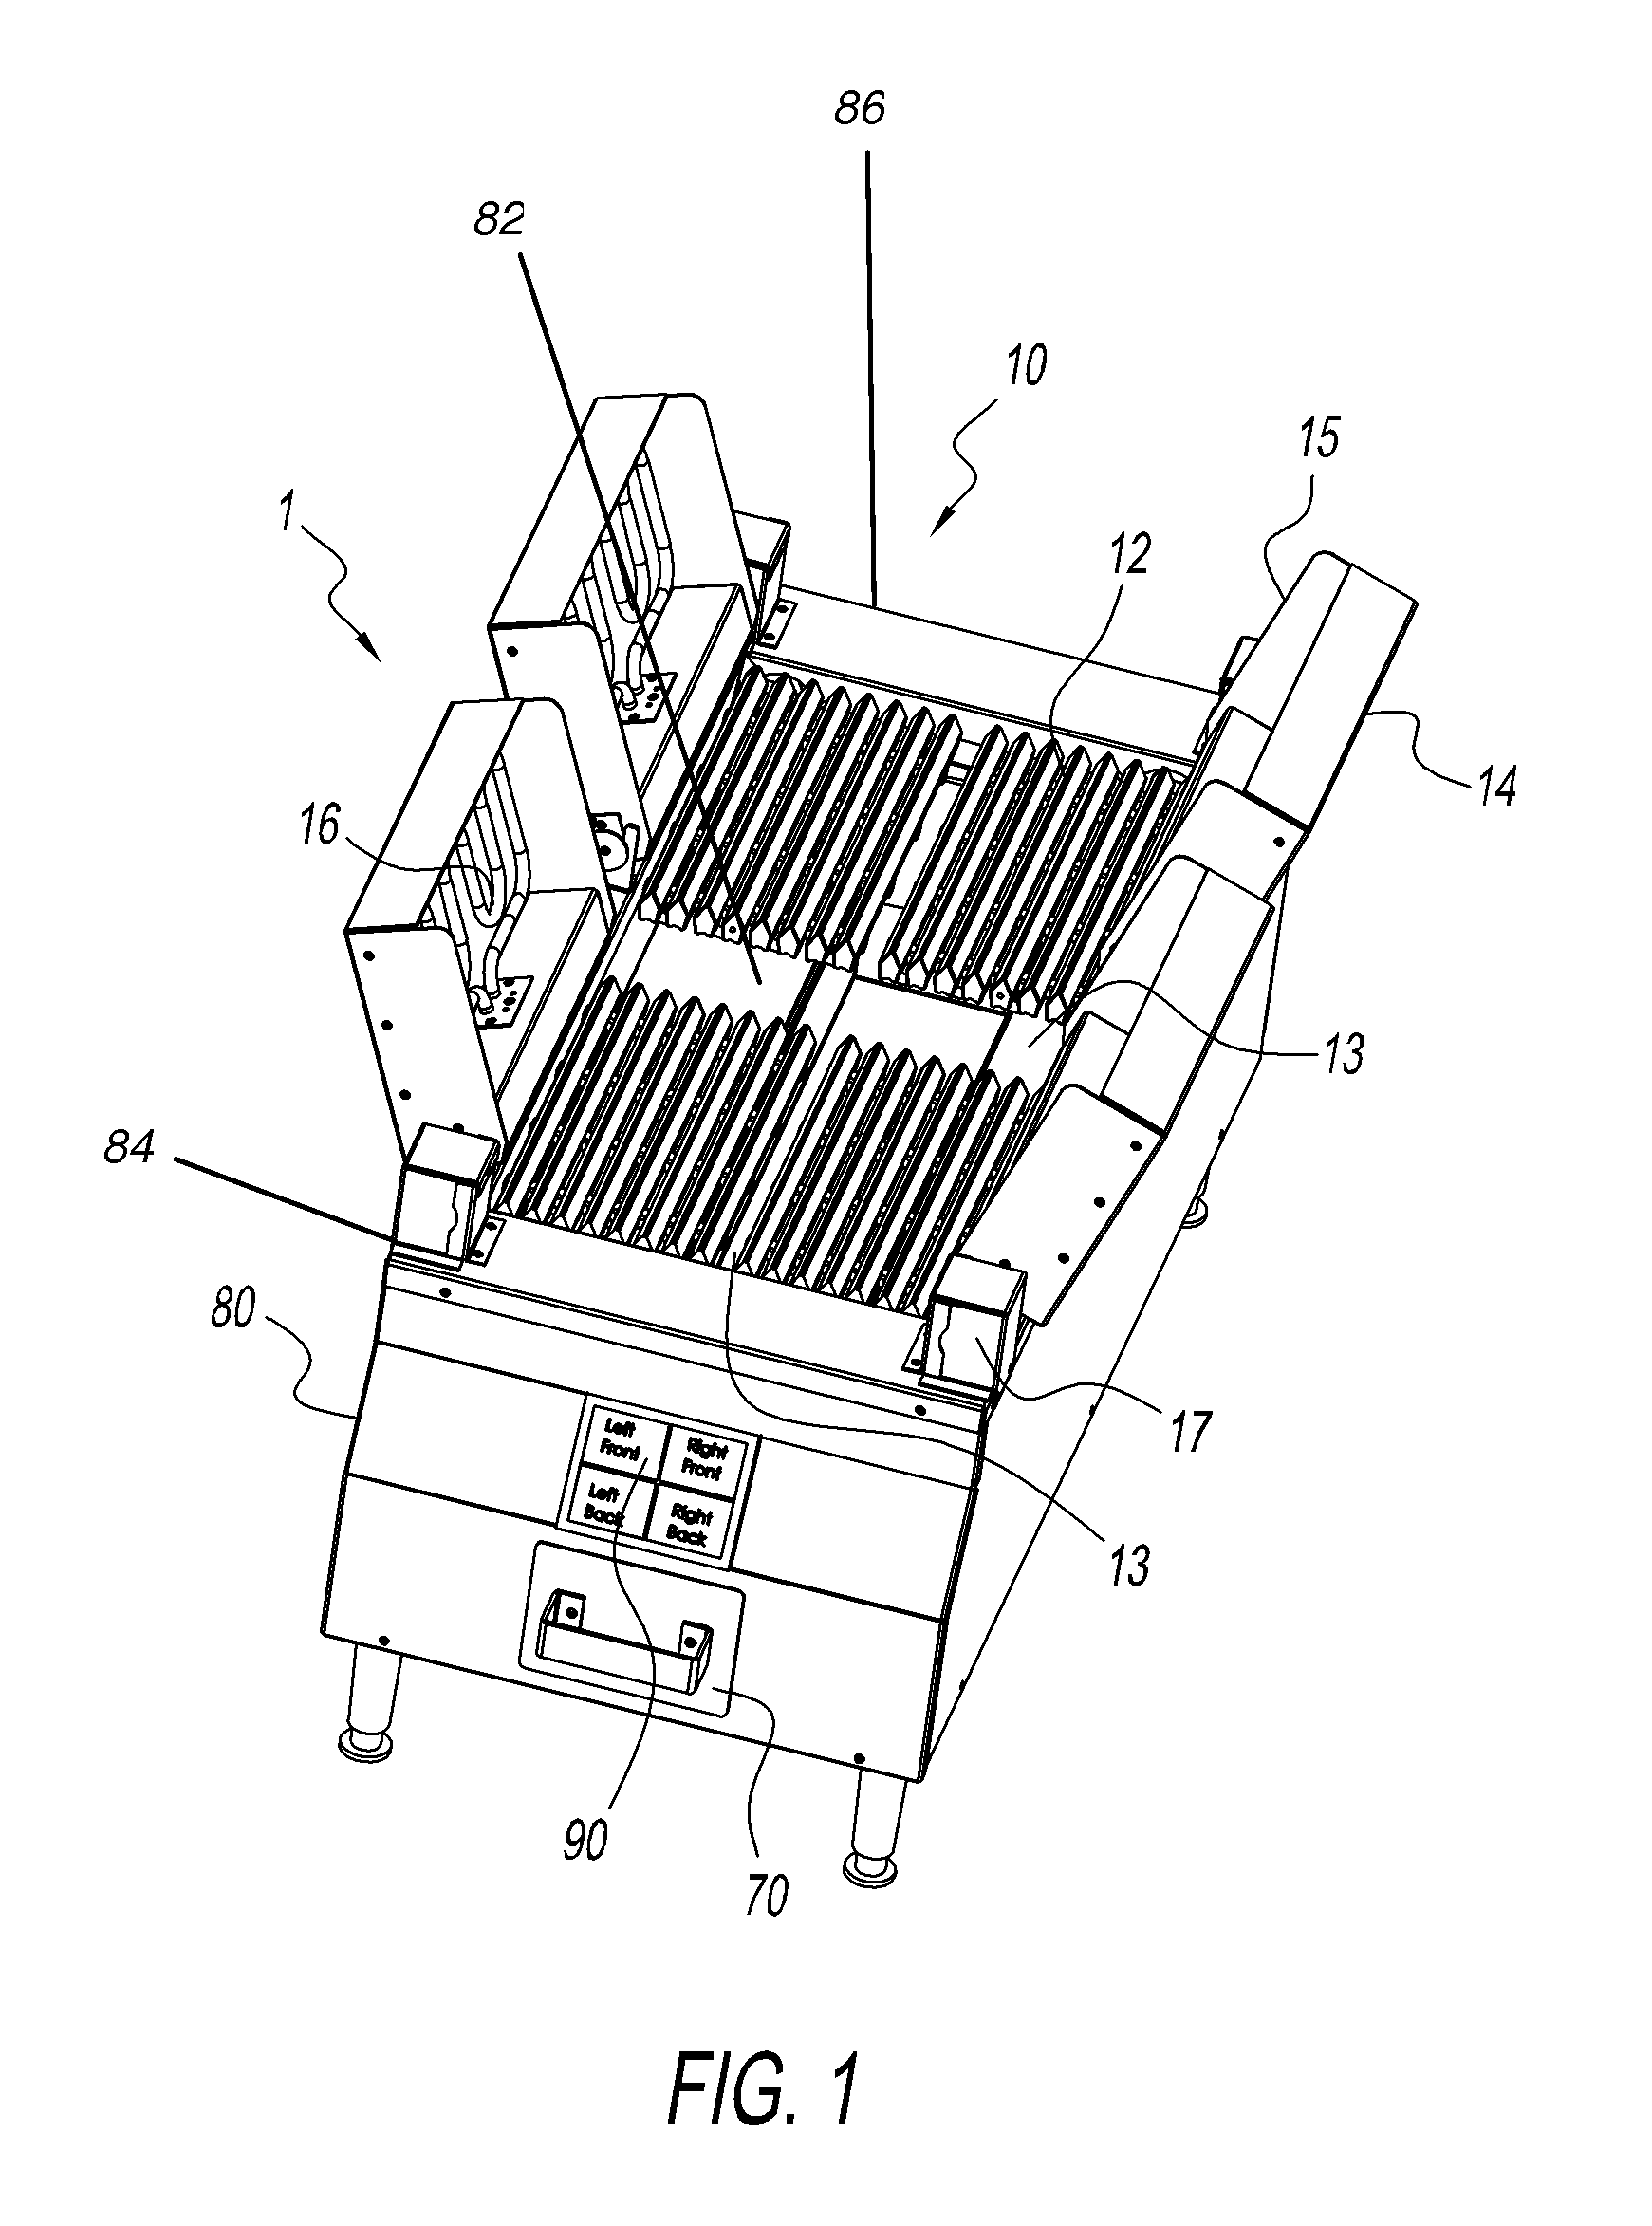 Multi-zoned clamshell charbroiler